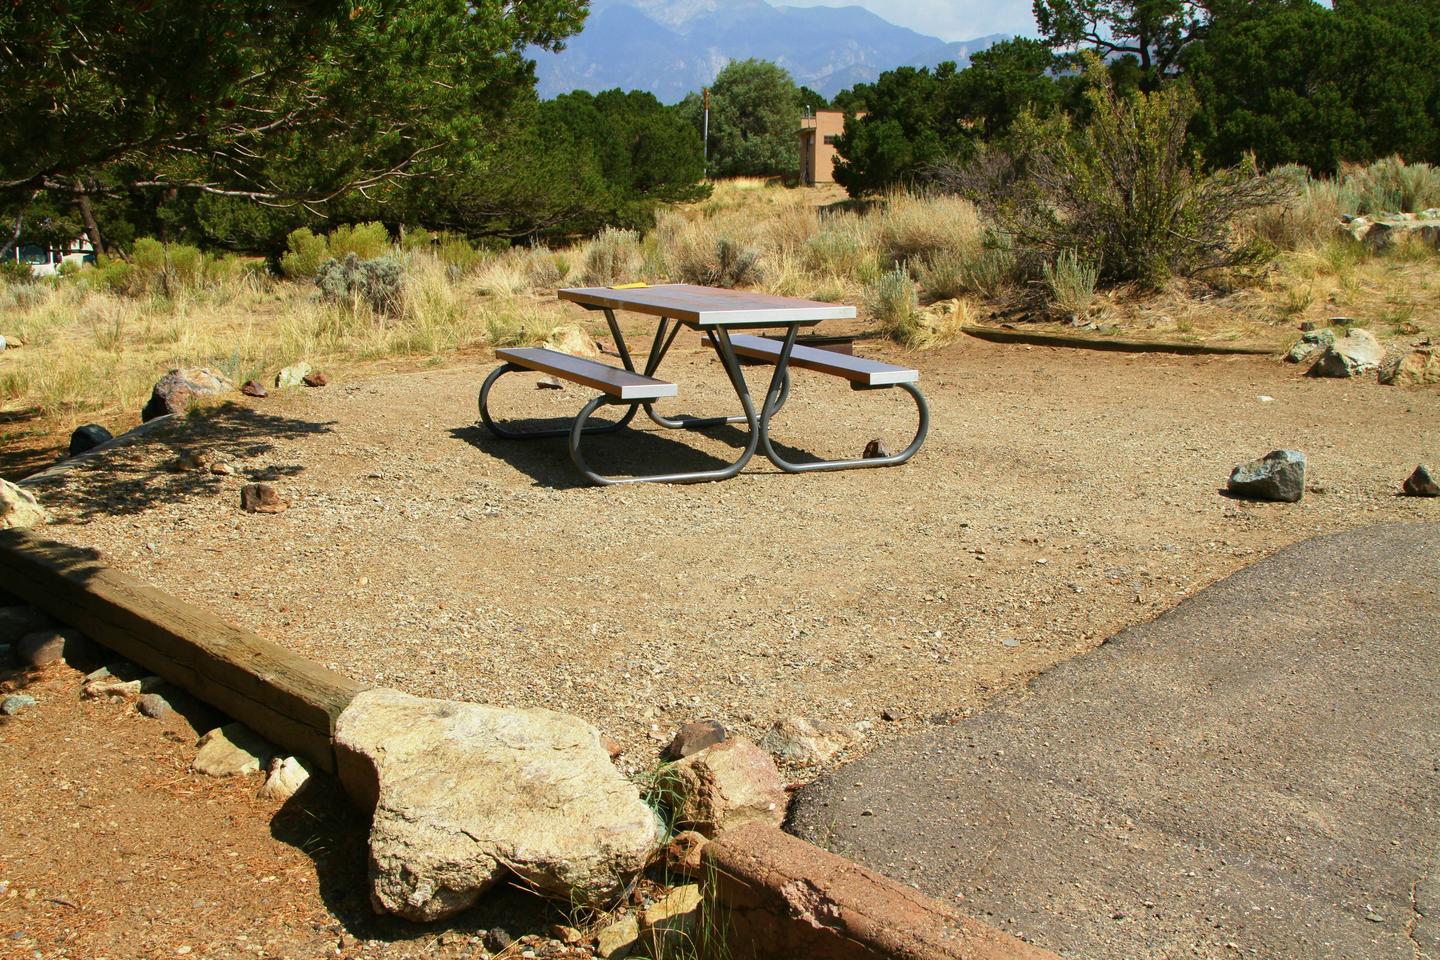 View of Site #41 tent site with picnic table and fire ring.Site #41, Pinon Flats Campground